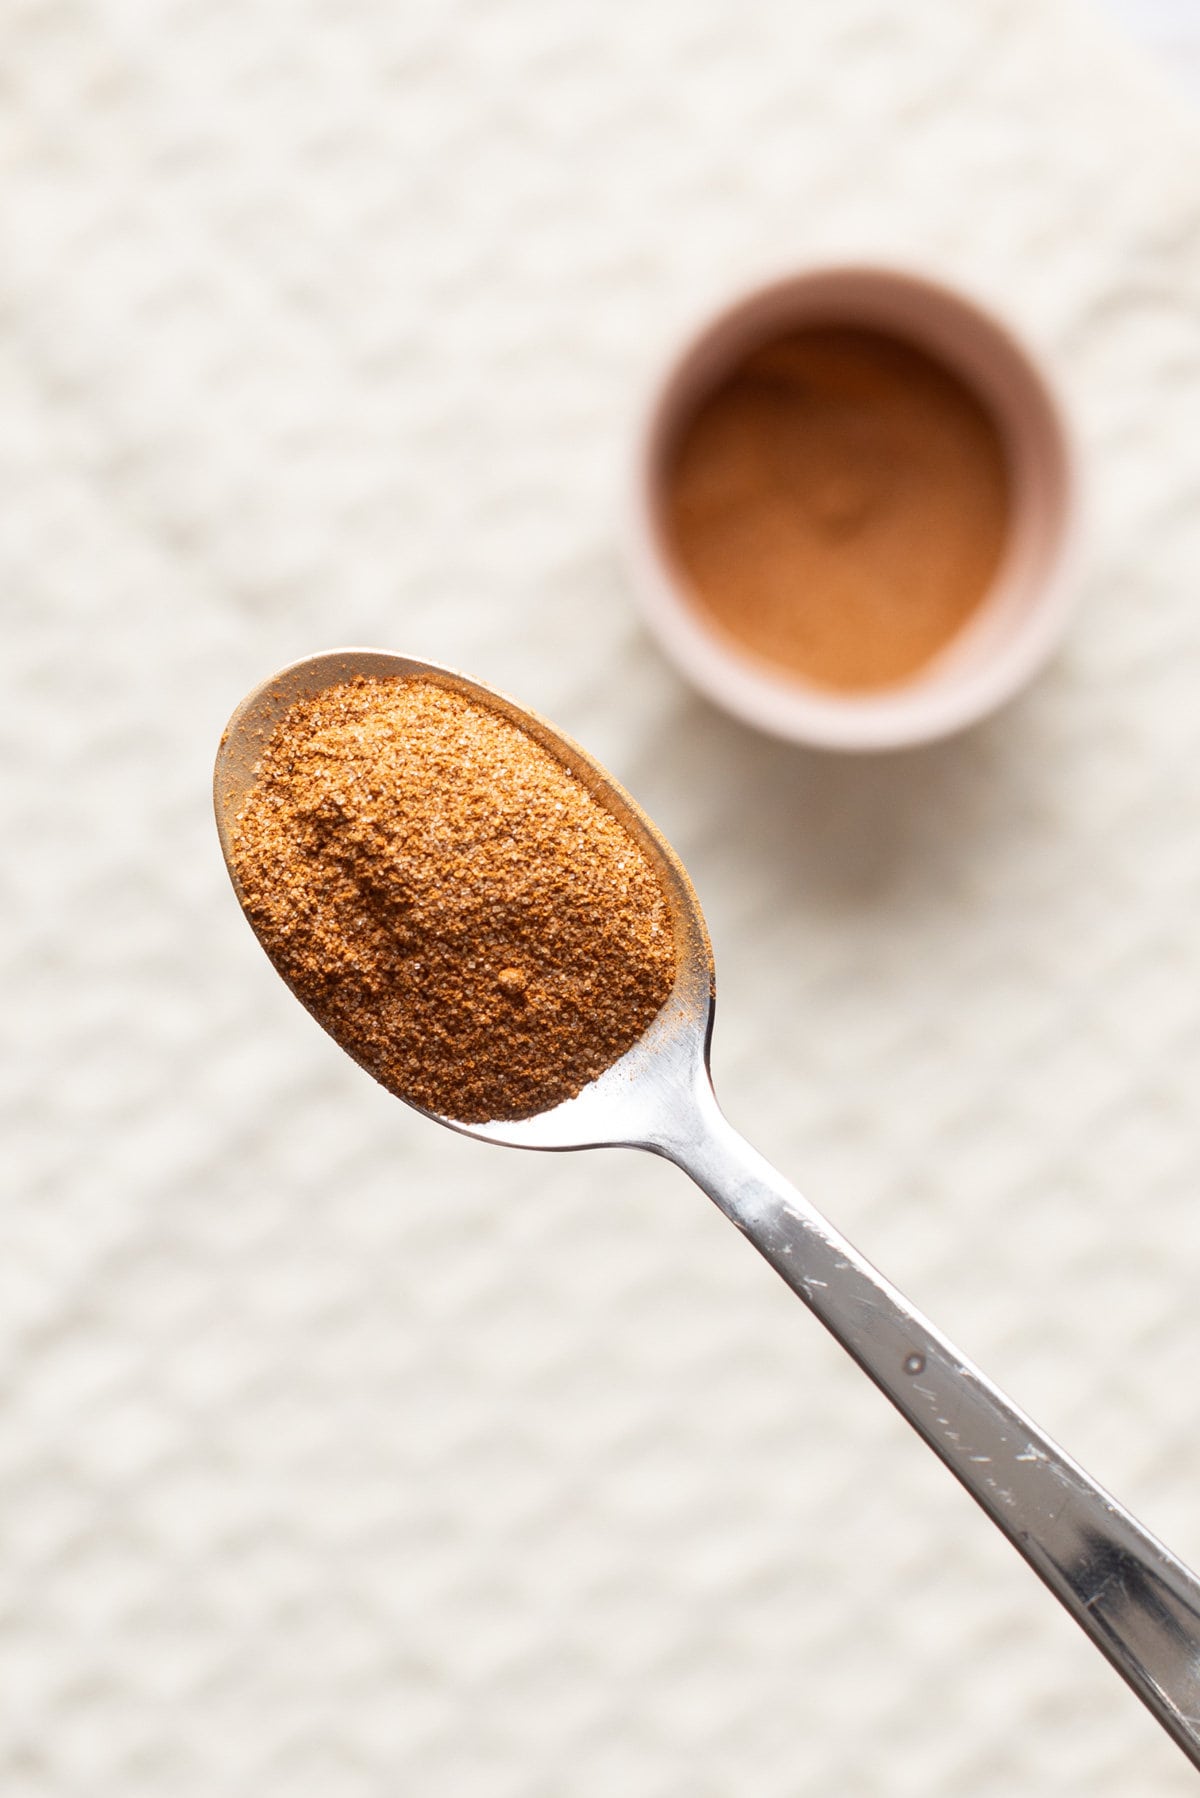 An image of a spoonful of pumpkin spice blend.